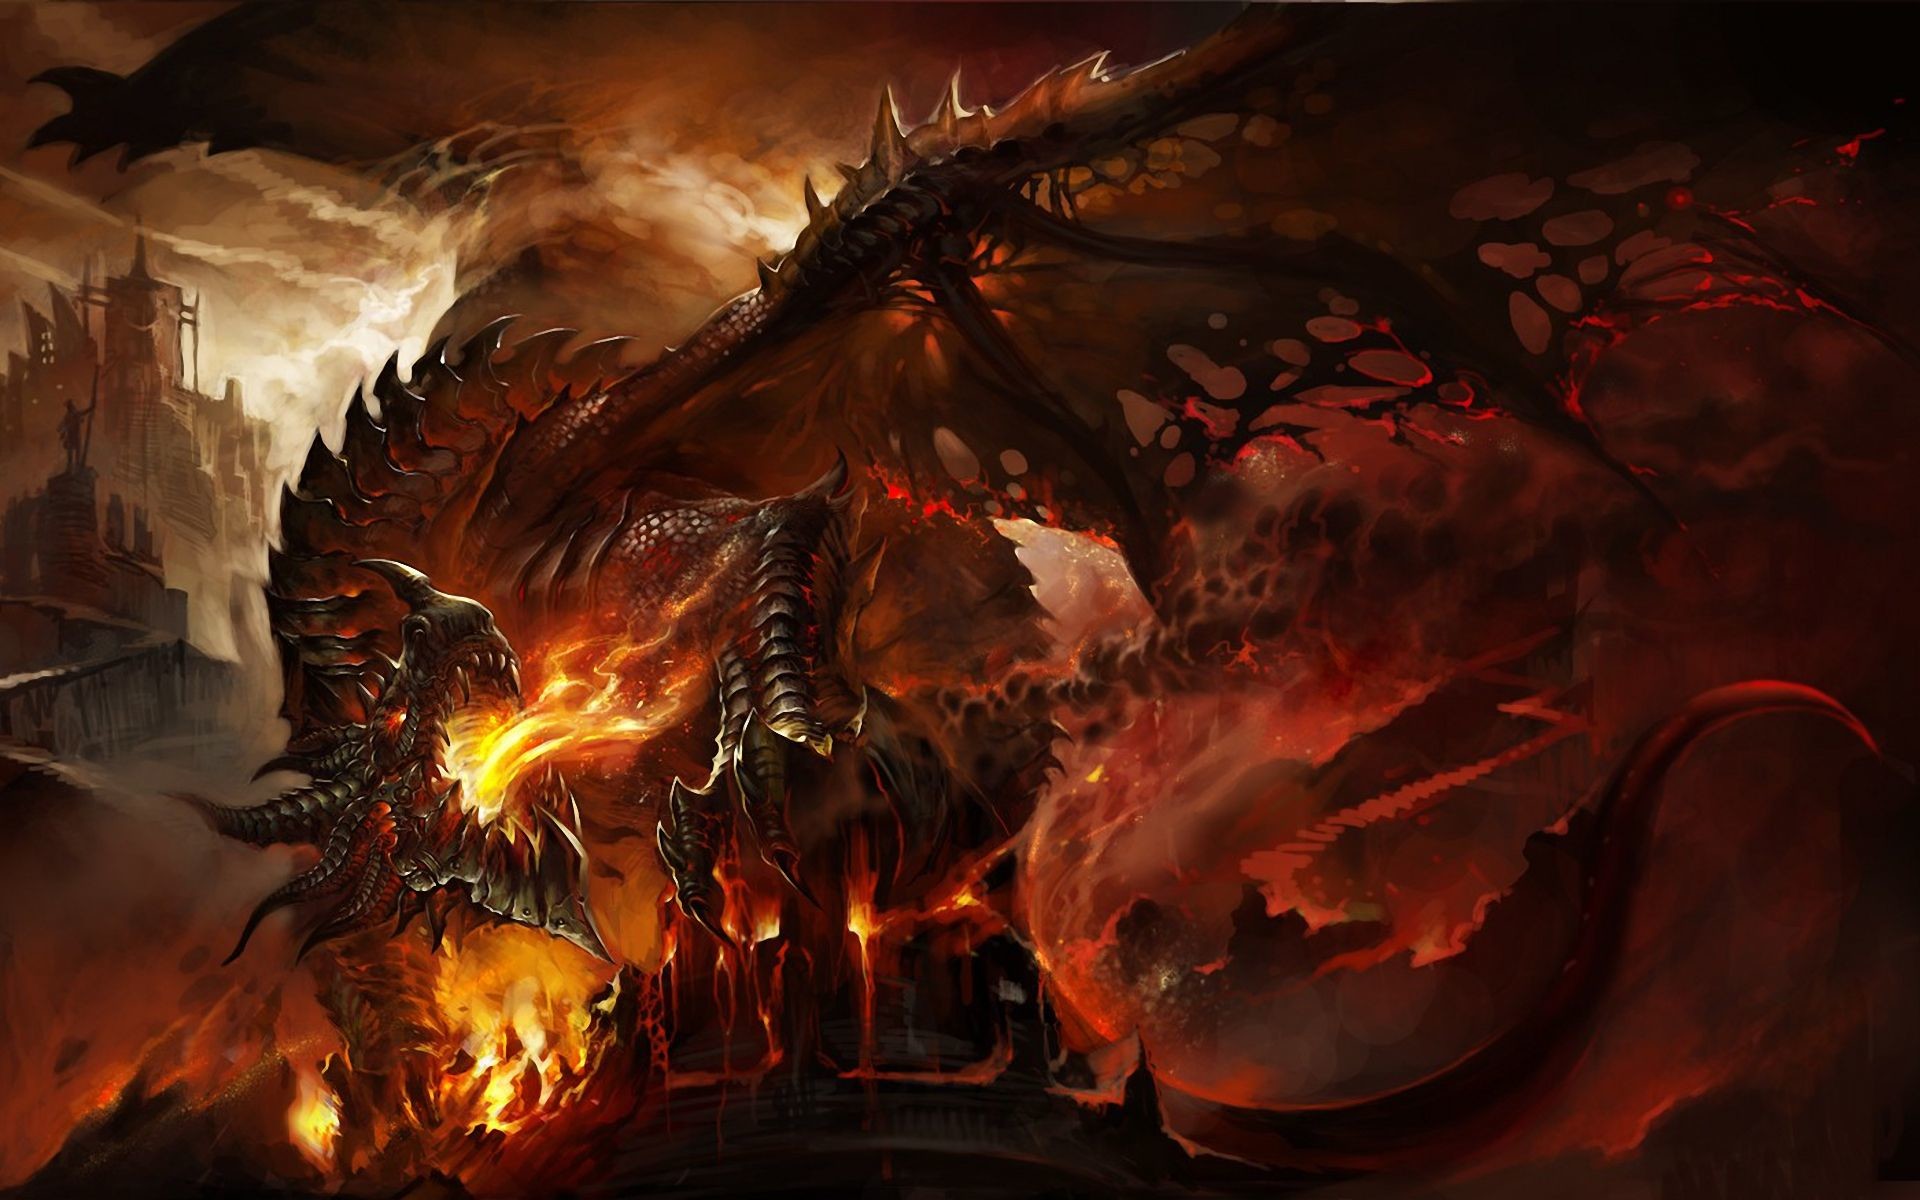 1920x1200 epic-dragon-wallpapers-hd-viewing-gallery-fire-dragon-wallpaper-1080p-hd- wallpapers-free-download-for-iphone-background-border-full-3d